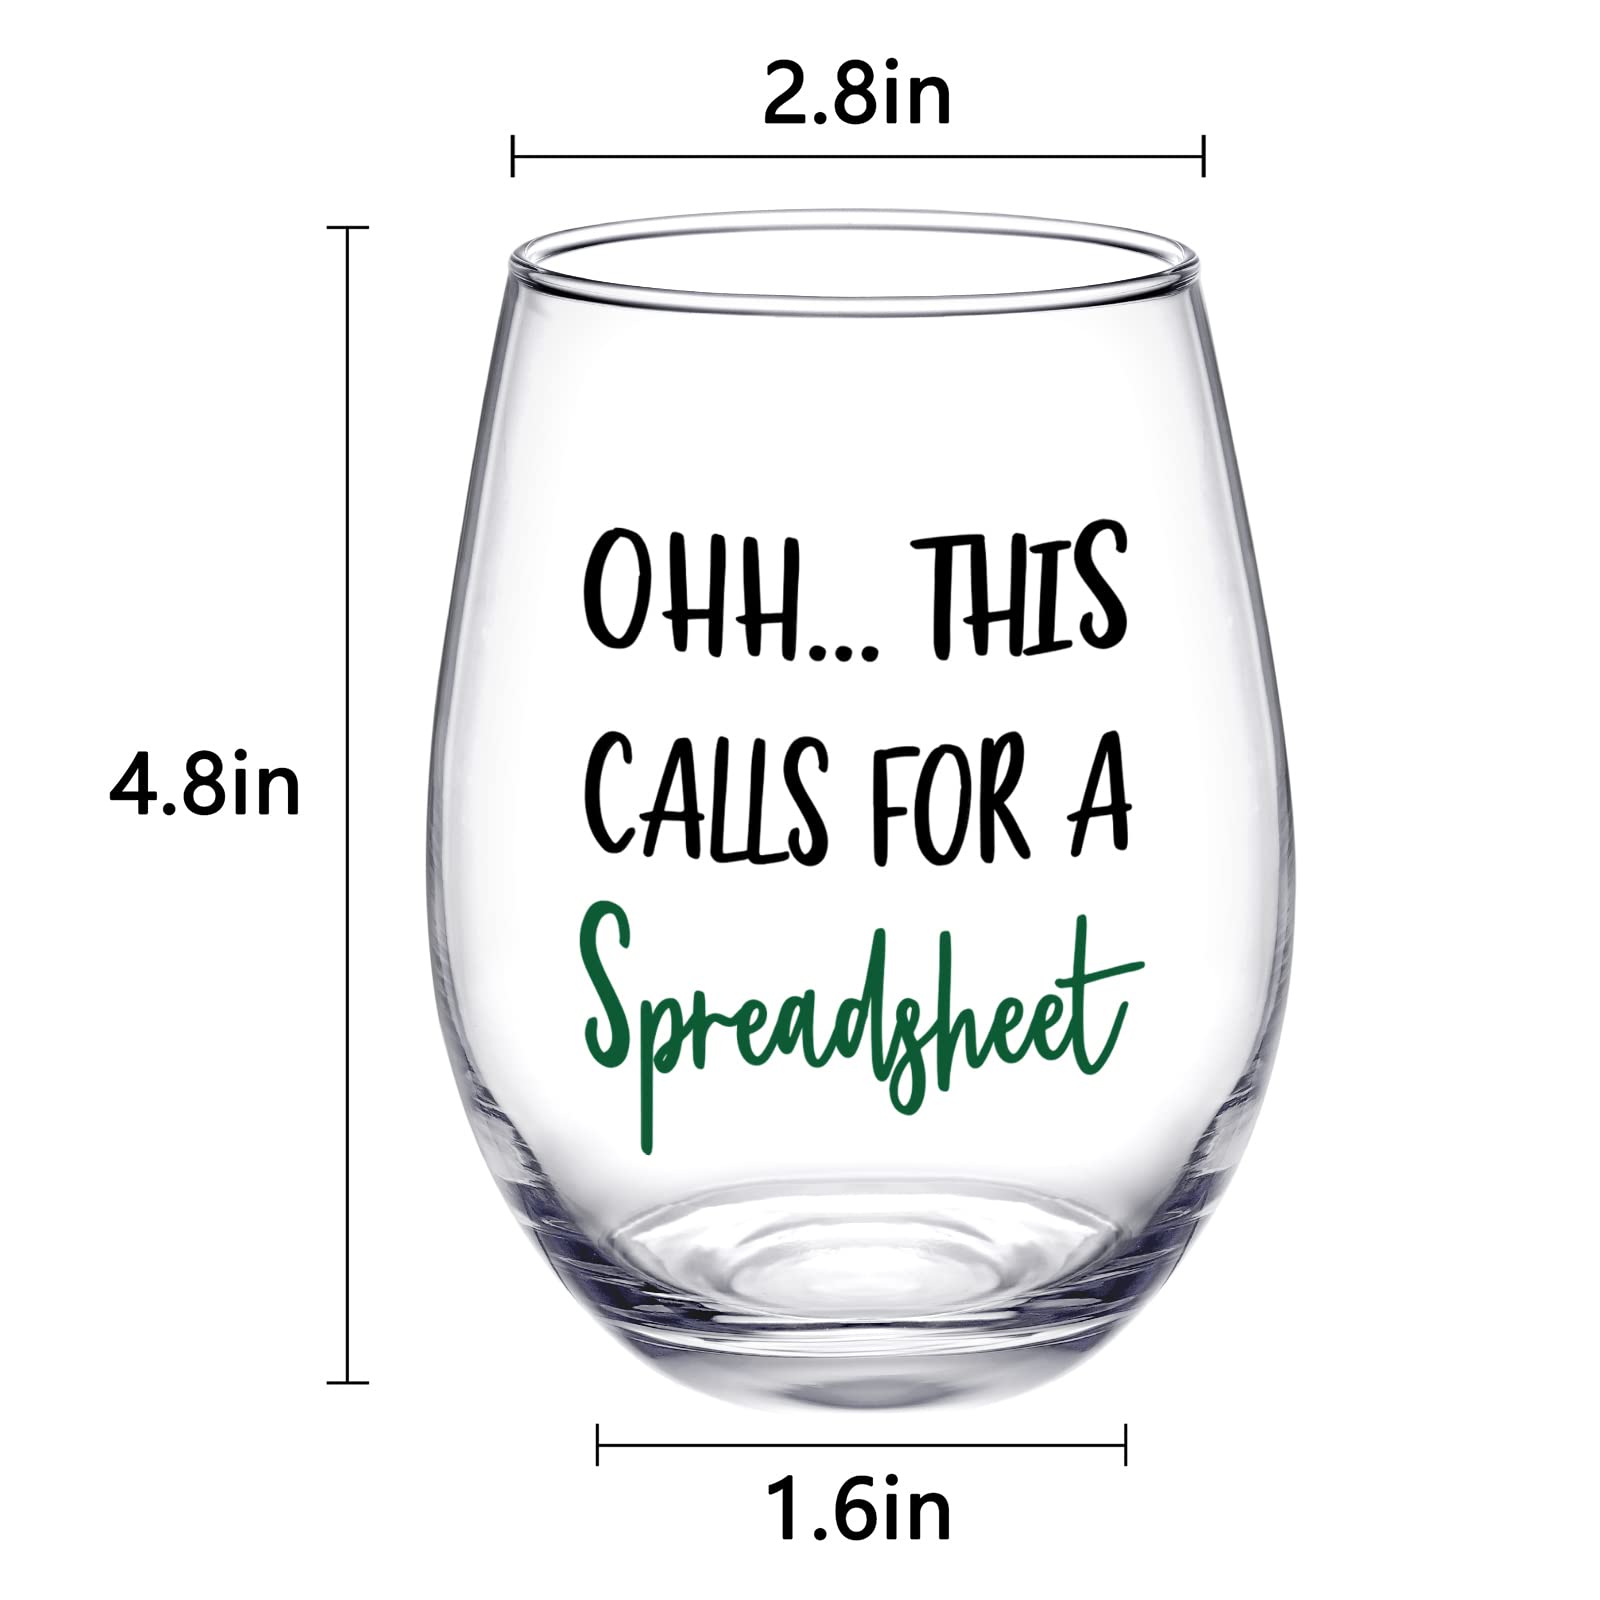 DAZLUTE Accountant Gifts, This Calls for A Spreadsheet Stemless Wine Glass for Women Accountant Banker Coworkers CPA Graduation Boss Friends, Spreadsheet Gifts for Office Nerd Christmas Birthday, 17oz